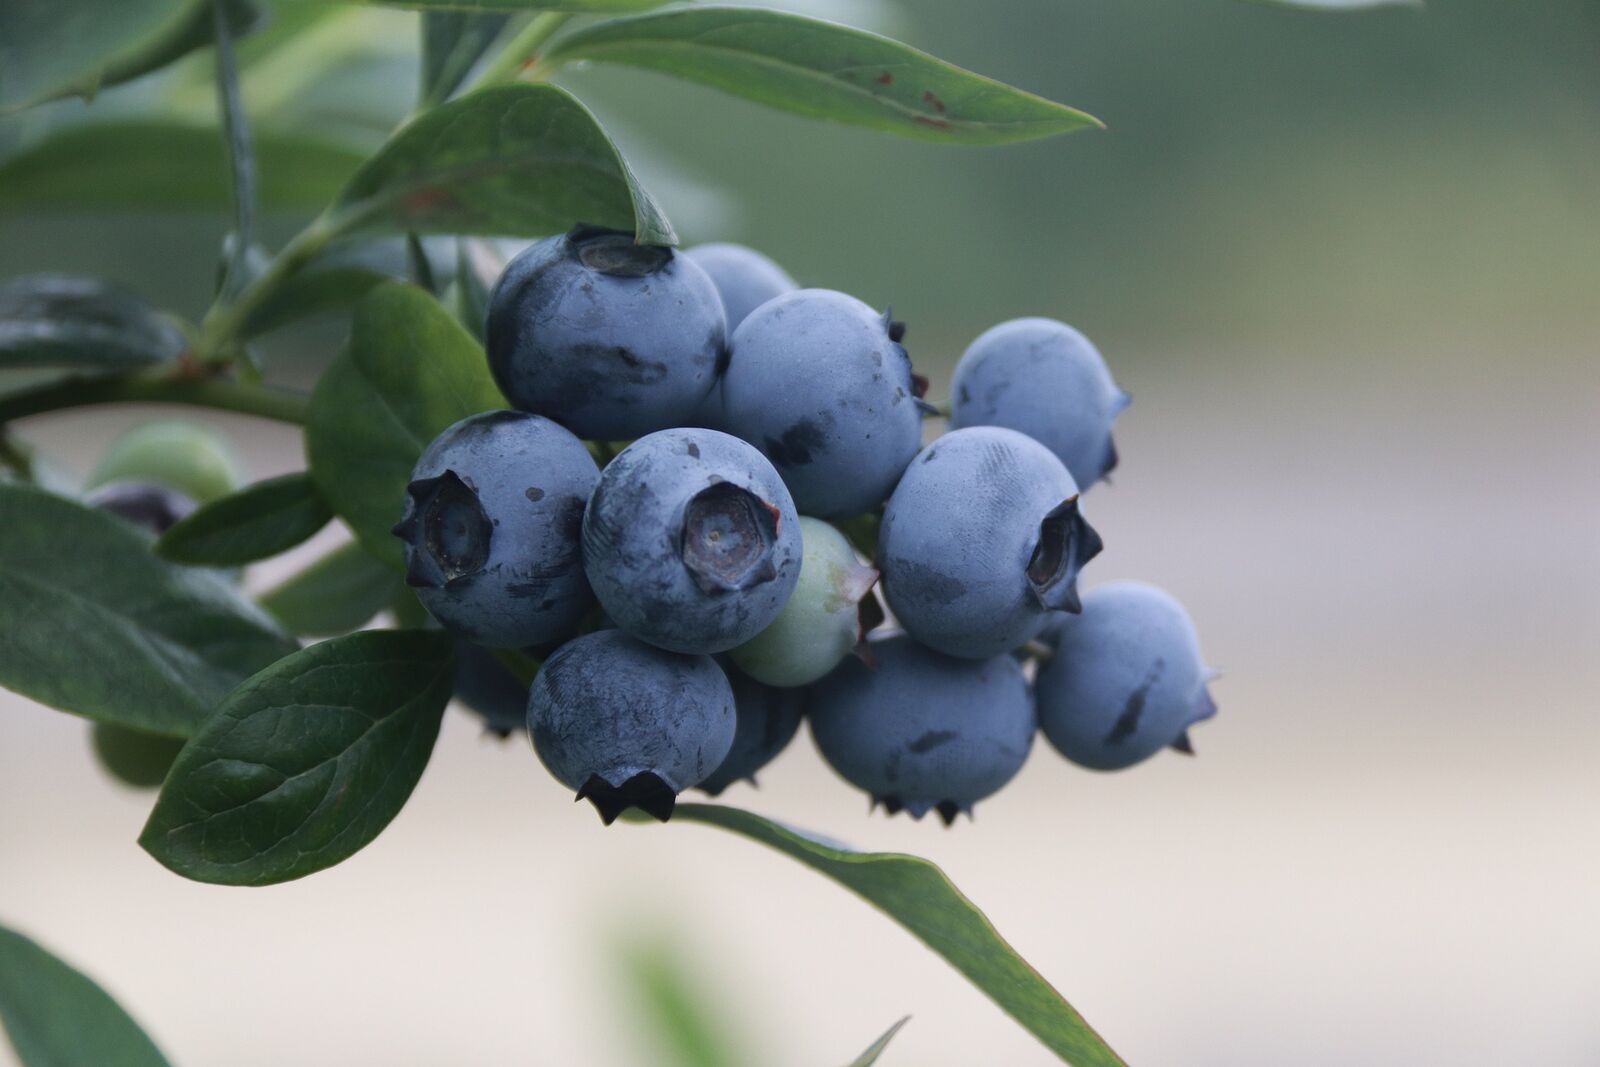 Pruning blueberry bushes: Good reasons